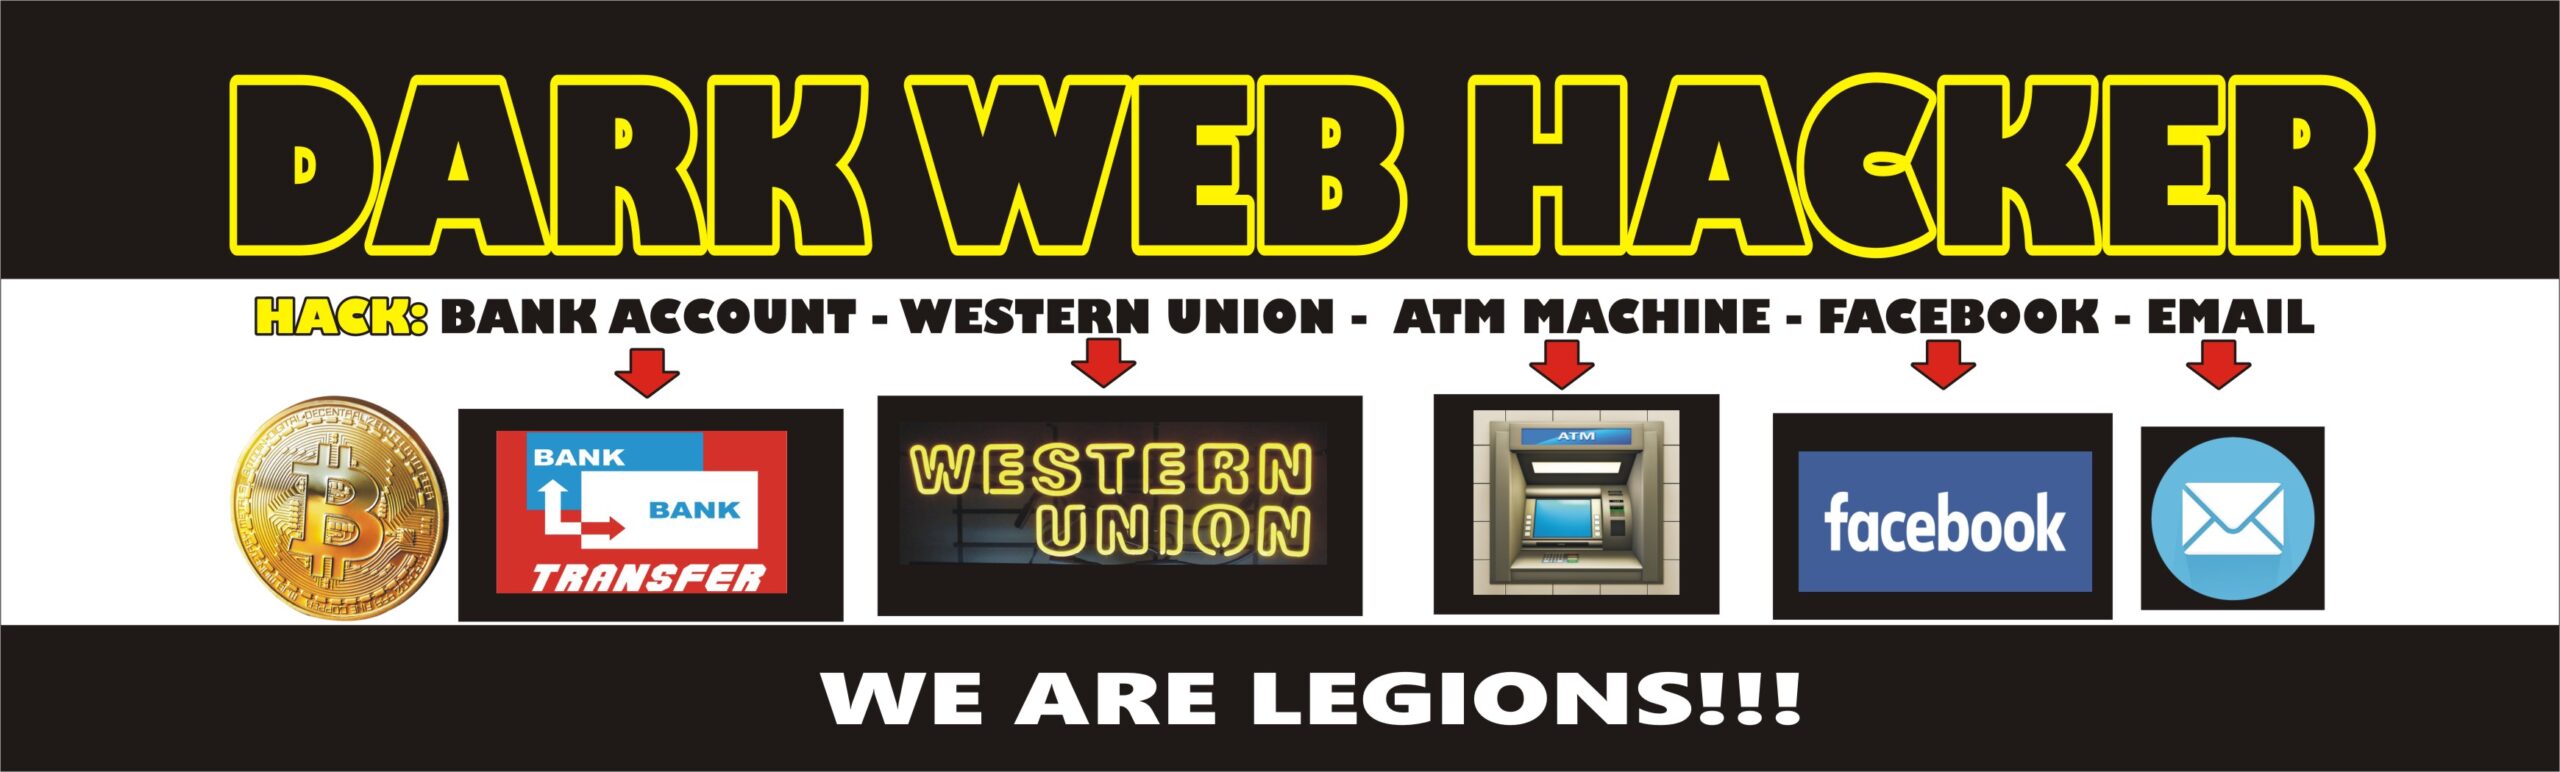 DARK WEB HACKING SERVICES - BANK ACCOUNT - WESTERN UNION - ATM MACHINE - PAYPAL - CREDIT CARDS - FACEBOOK & EMAILS